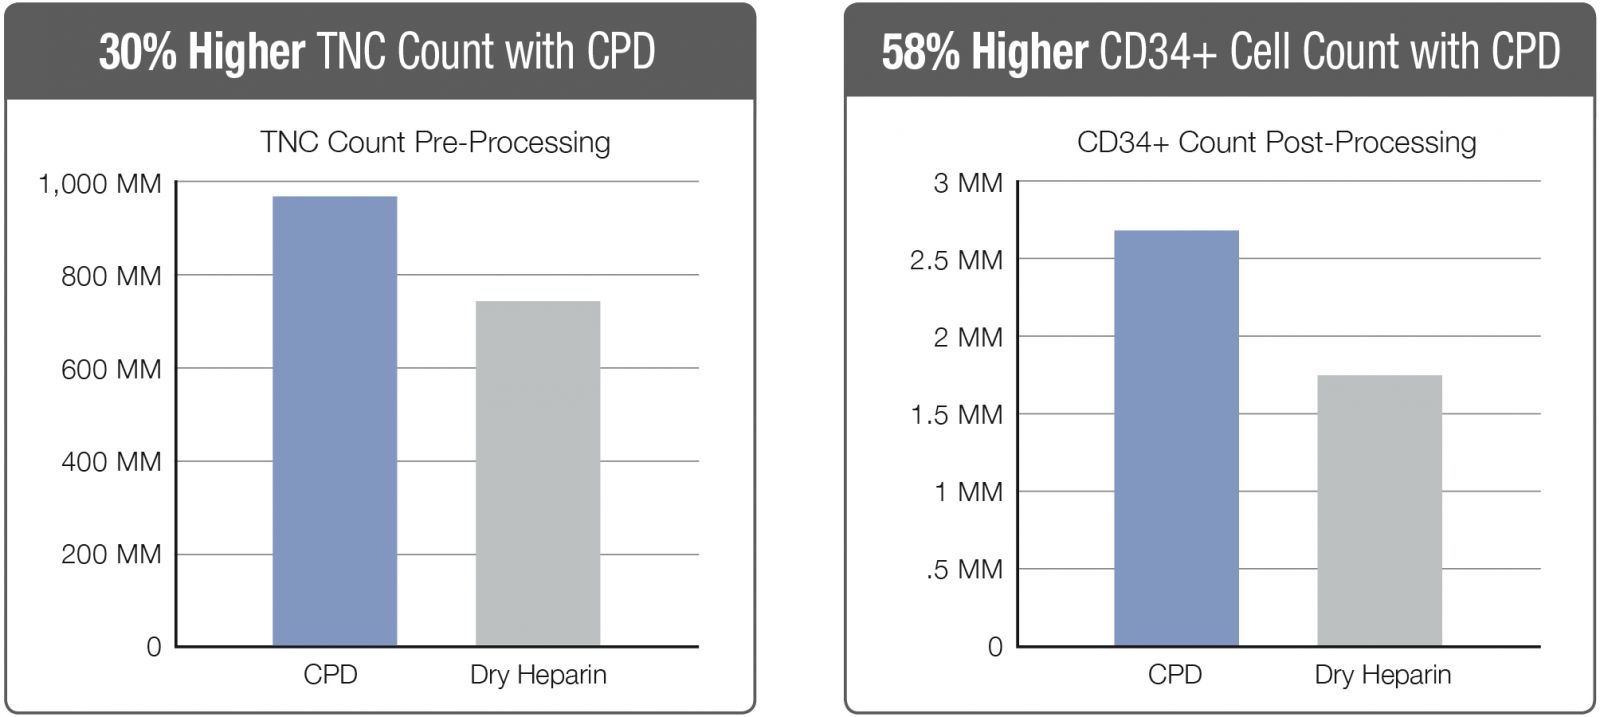 CPD Verses Dry Heparin Chart - Cord Blood Collection